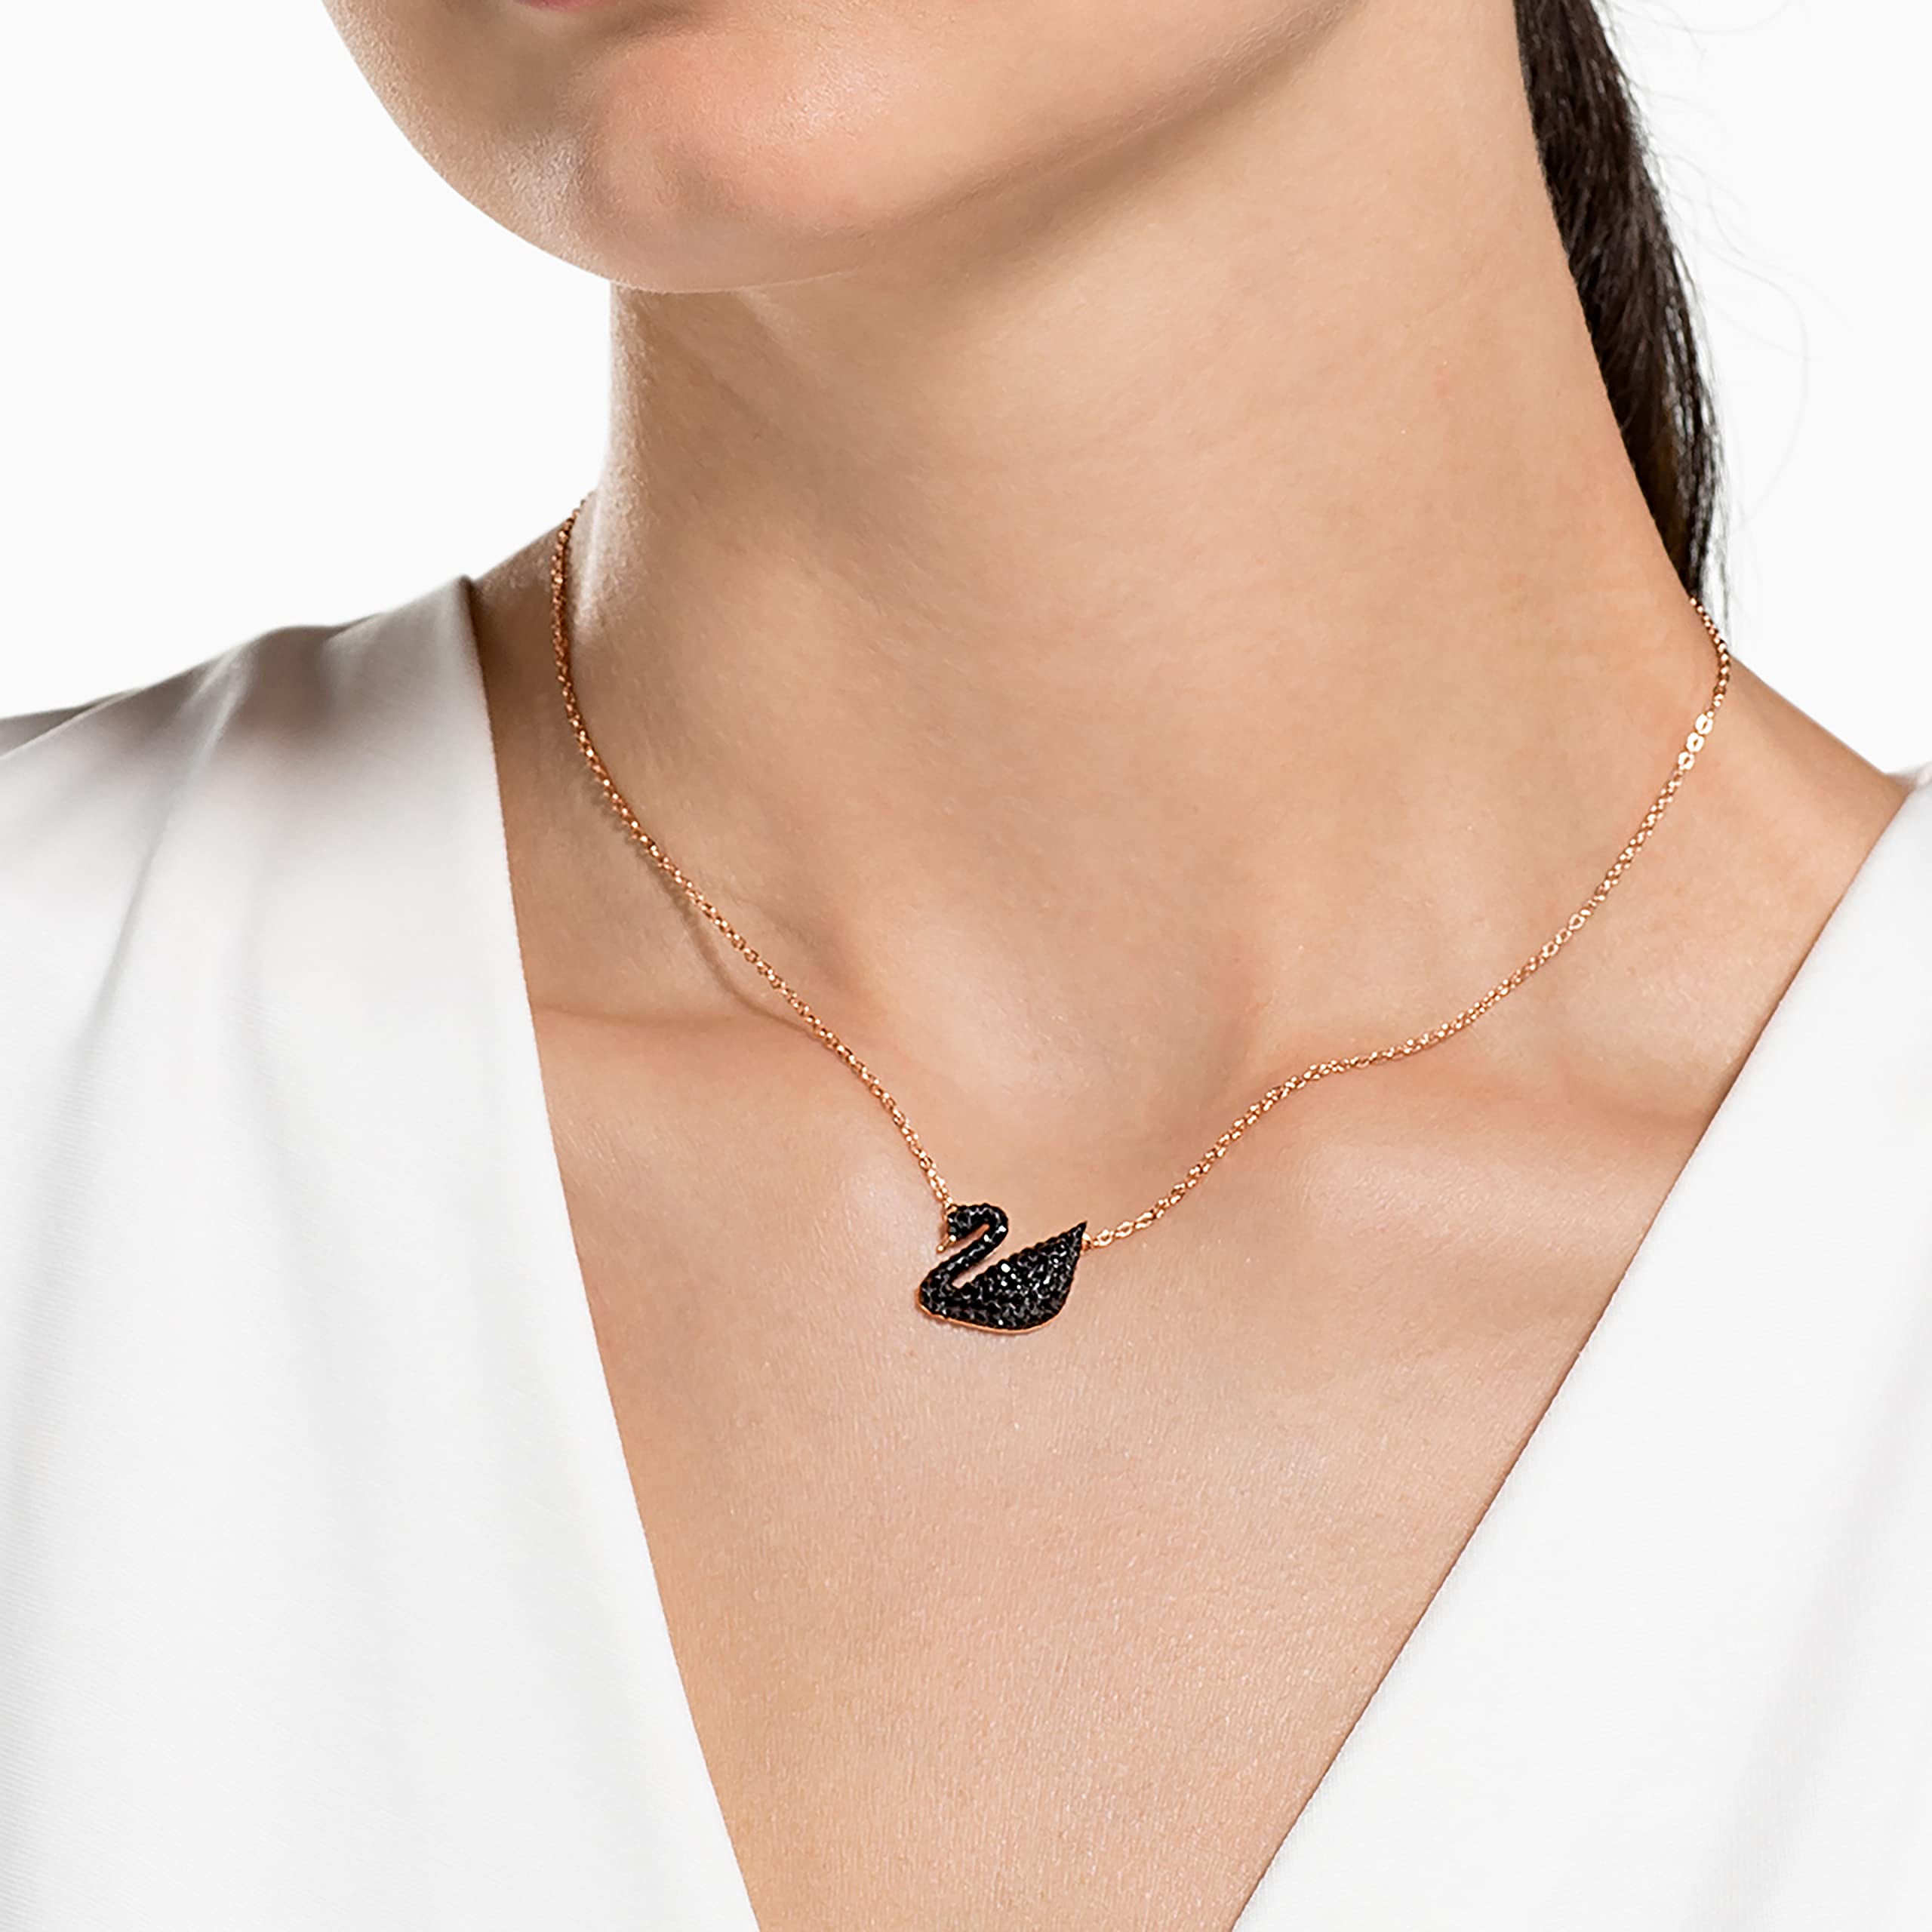 SWAROVSKI Iconic Swan Necklace and Earrings Collection, Rose Gold Tone Finish, Black Crystals